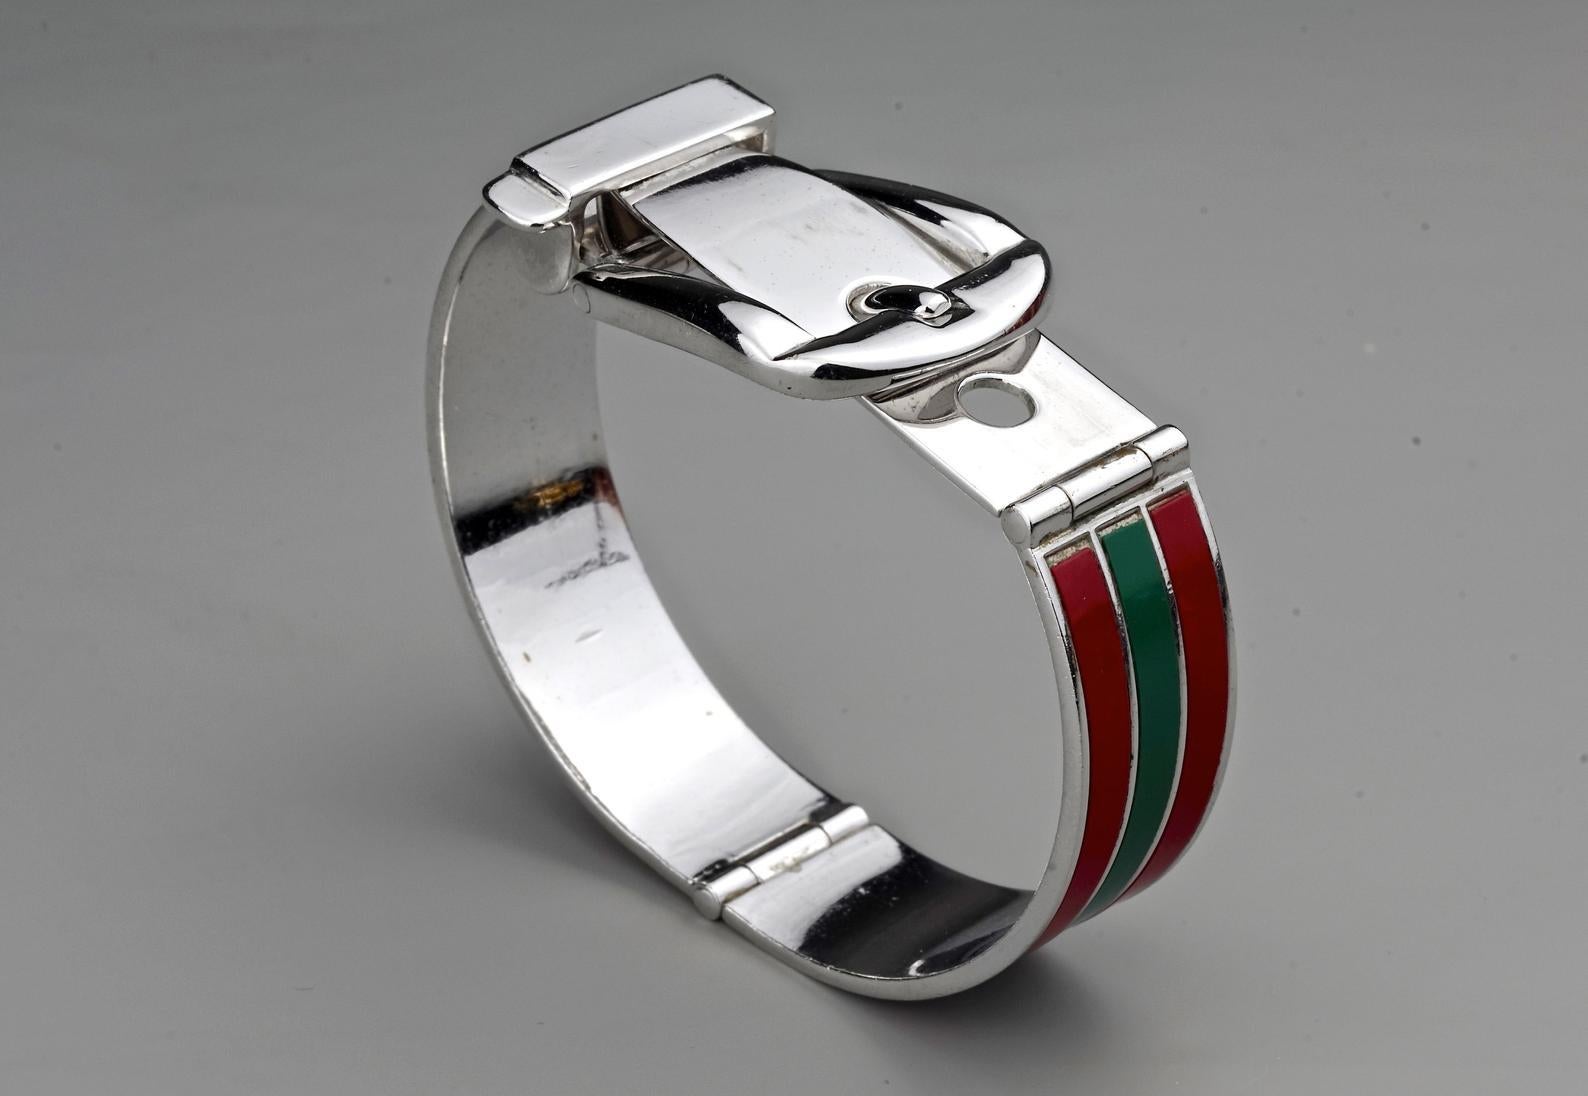 Vintage Iconic GUCCI Enamel Buckle Cuff Bracelet

Measurements:
Height: 1 inch (2.5 cm)
Wearable Length: 6.42 inches to 6.85 inches (16.3 cm to 17.4 cm)

Features:
- 100% Authentic GUCCI.
- Iconic GUCCI green and red enamel strips.
- Adjustable